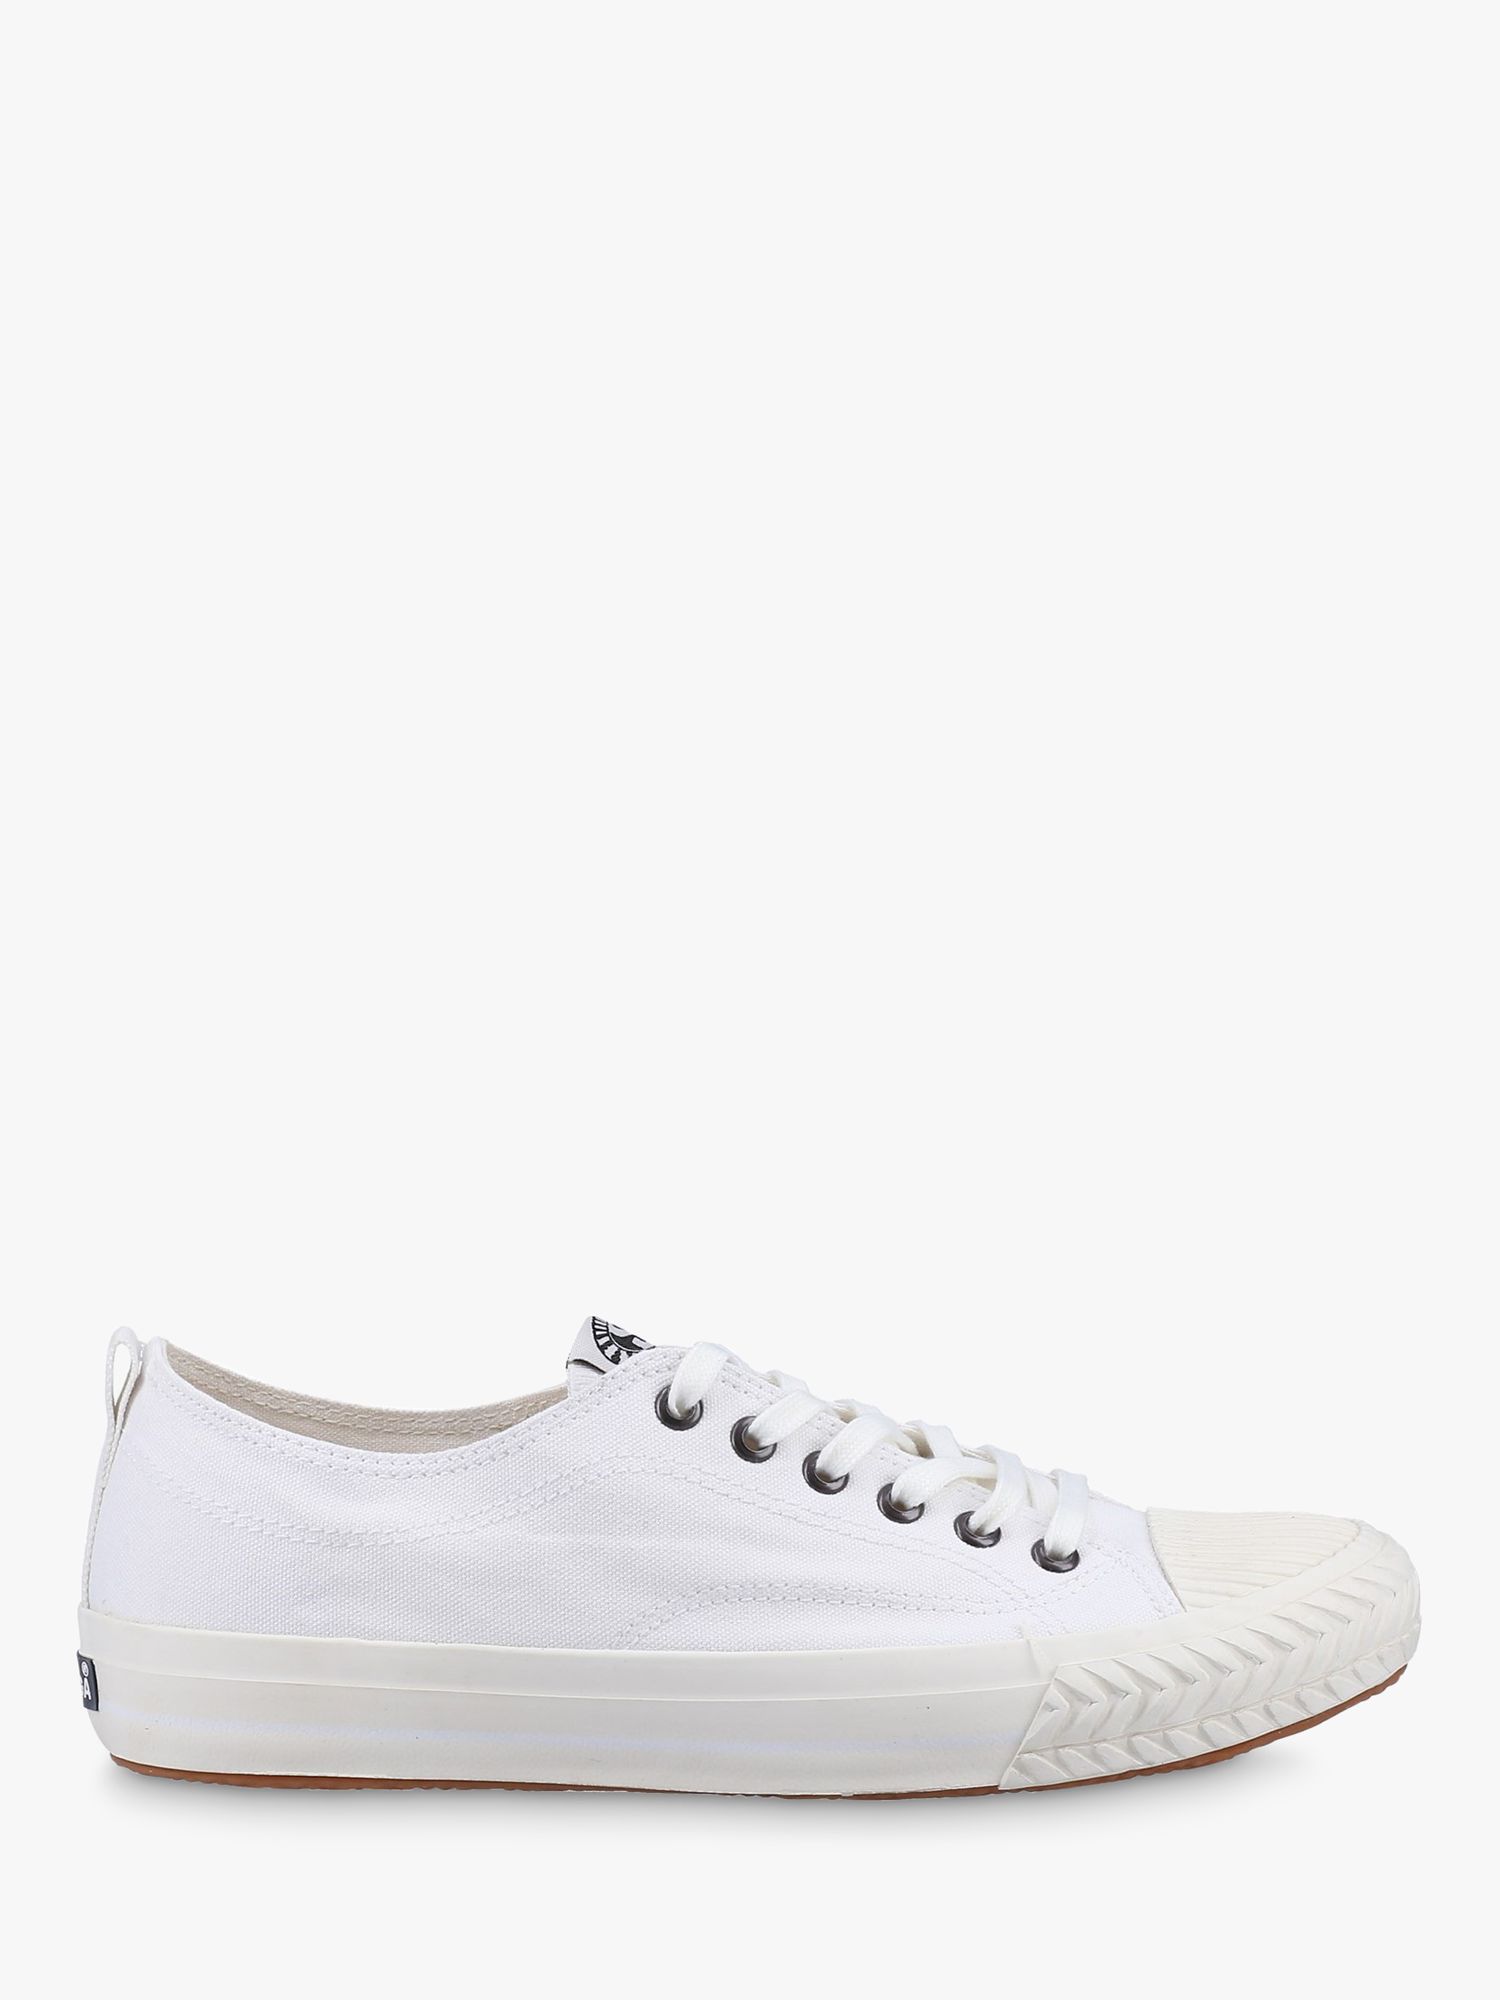 Superga 289 College Low Top Canvas Trainers, White